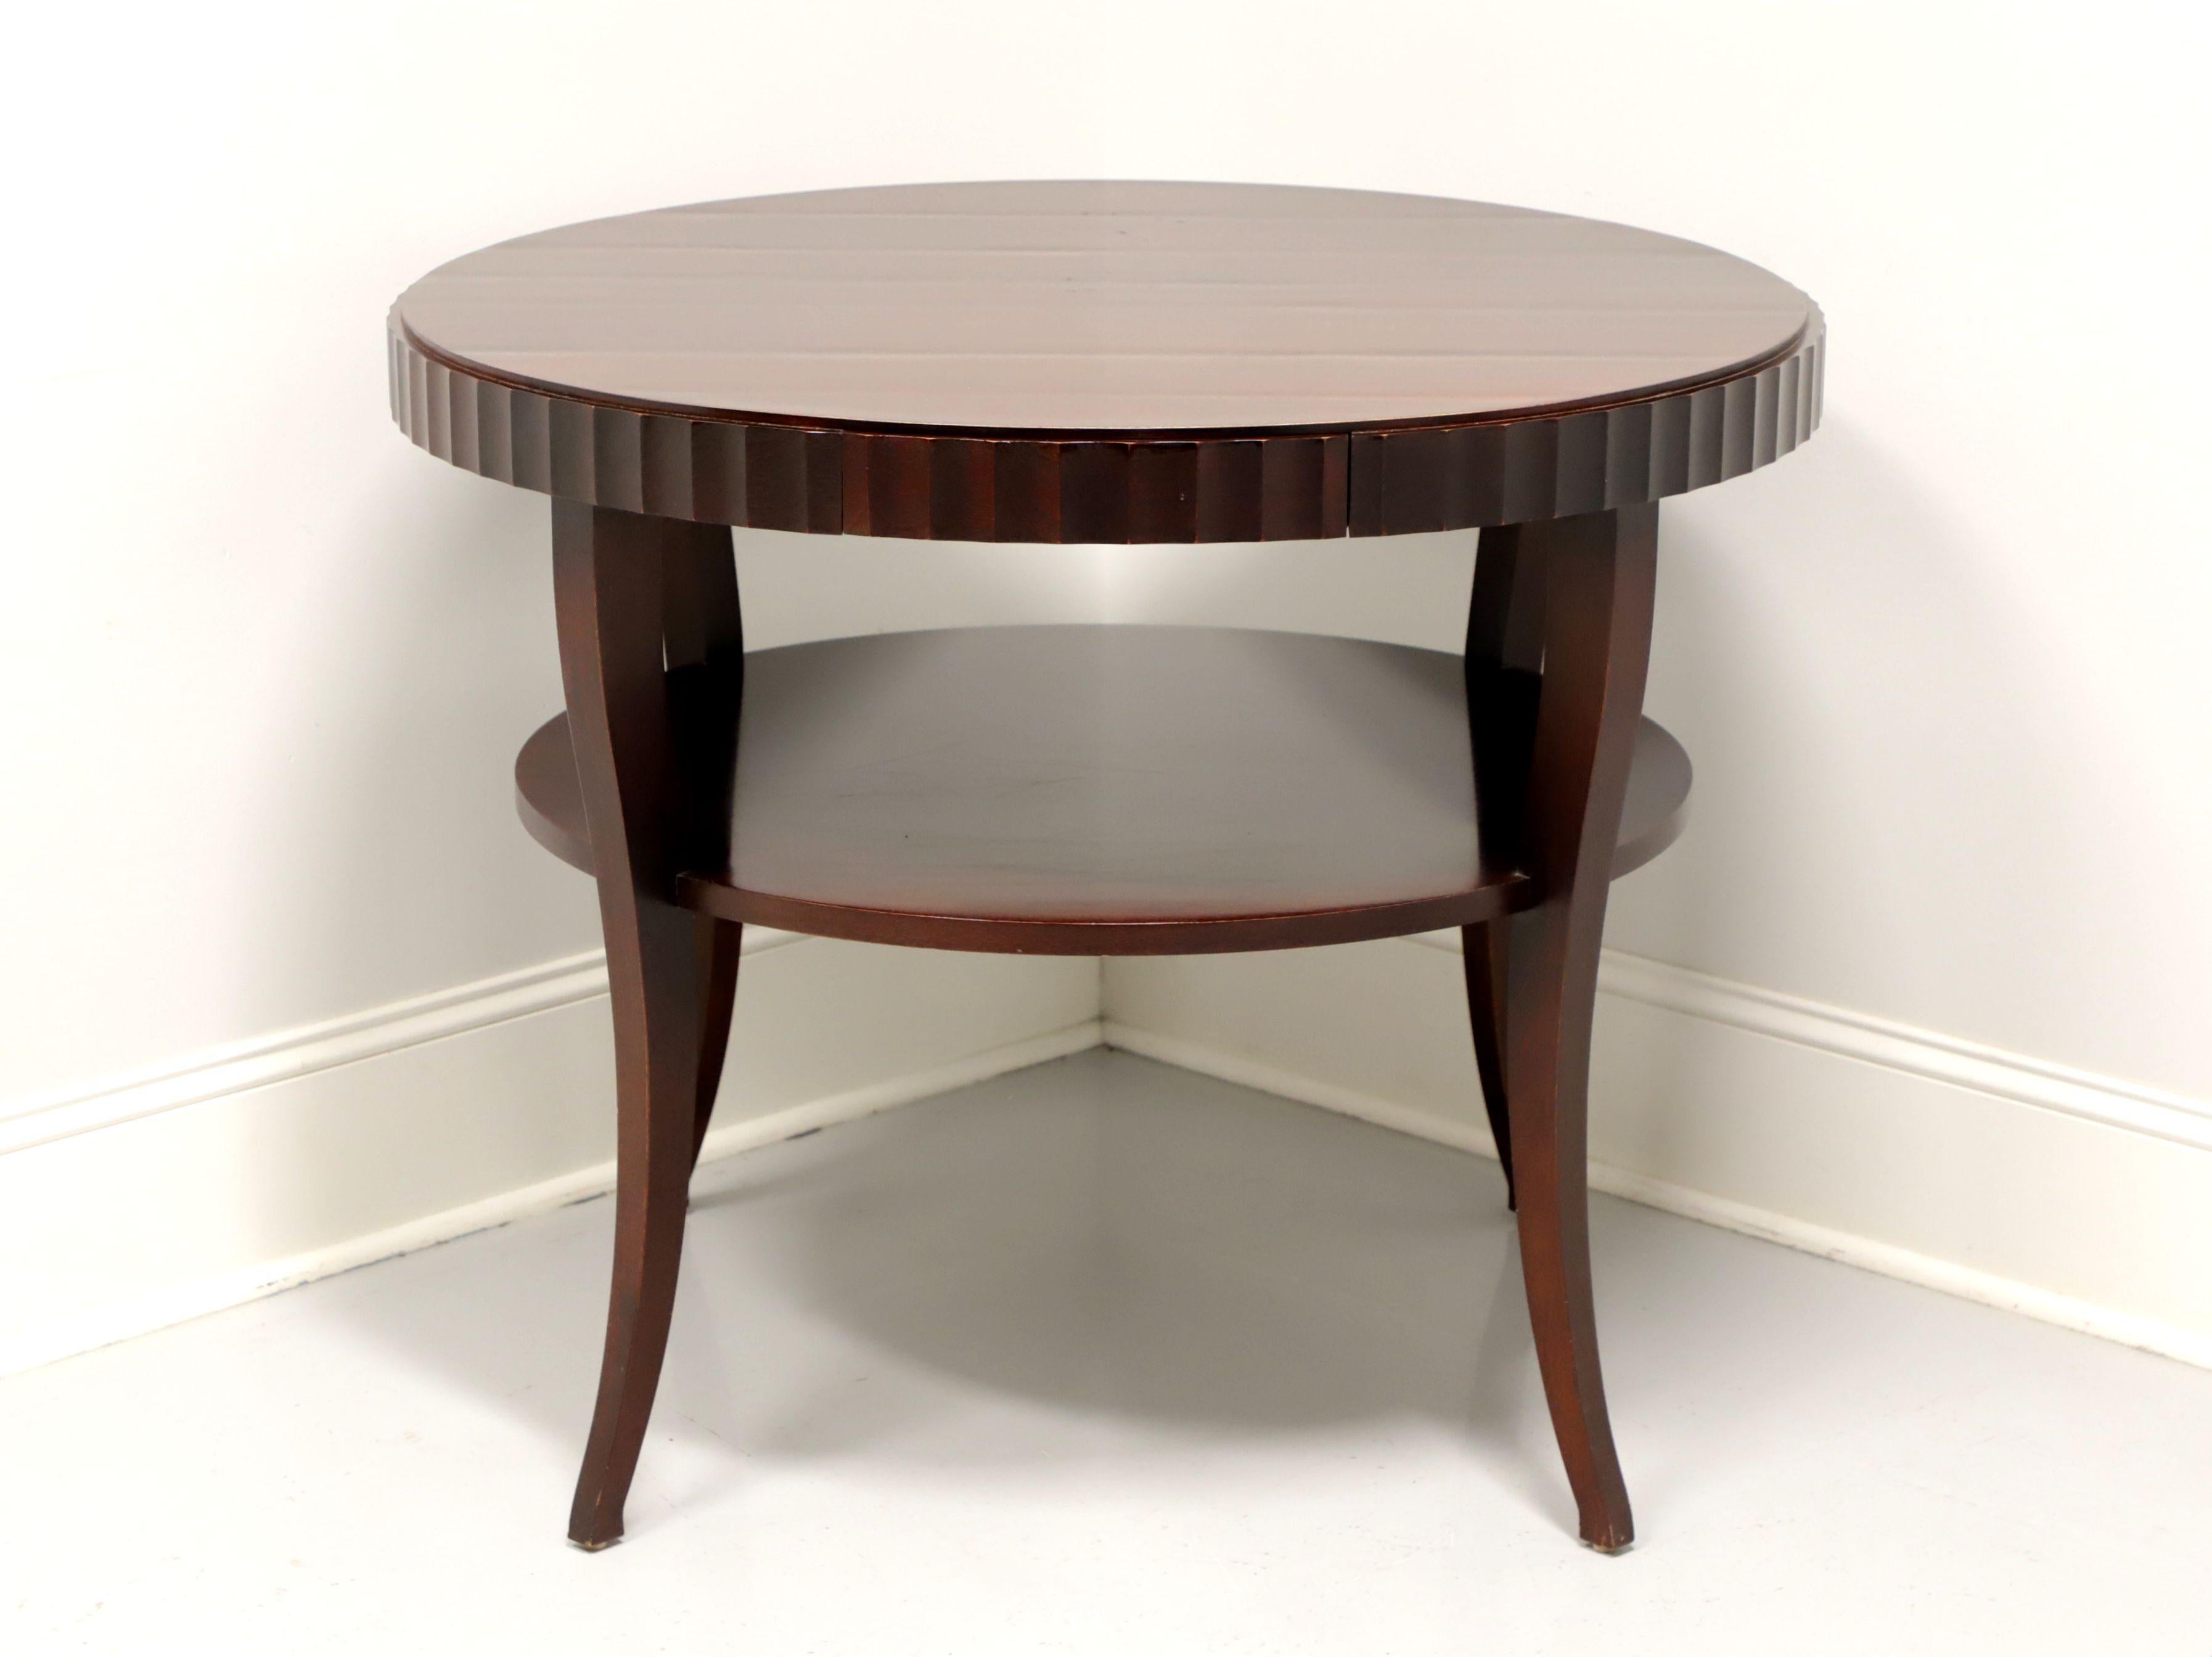 A Contemporary style round two-tier center accent table by Barbara Barry for Baker Furniture. Solid mahogany, with one hidden drawer in the scalloped apron, an undertier shelf and tapered saber legs. Made in the USA, in the early 21st